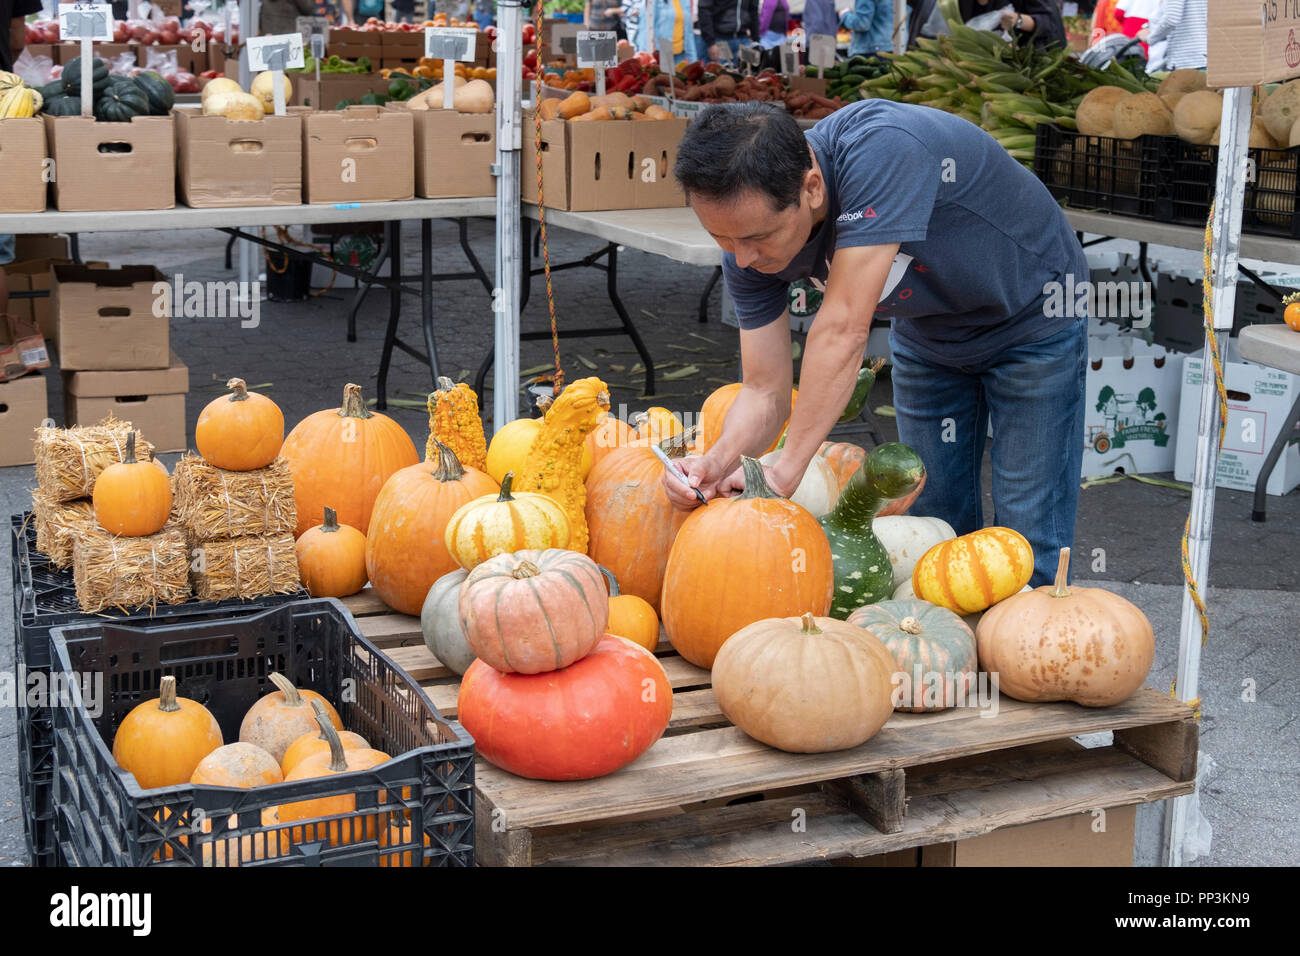 In early Fall, a vendor at the Union Square Green Market marks prices on pumpkins and gourds. New York City. Stock Photo